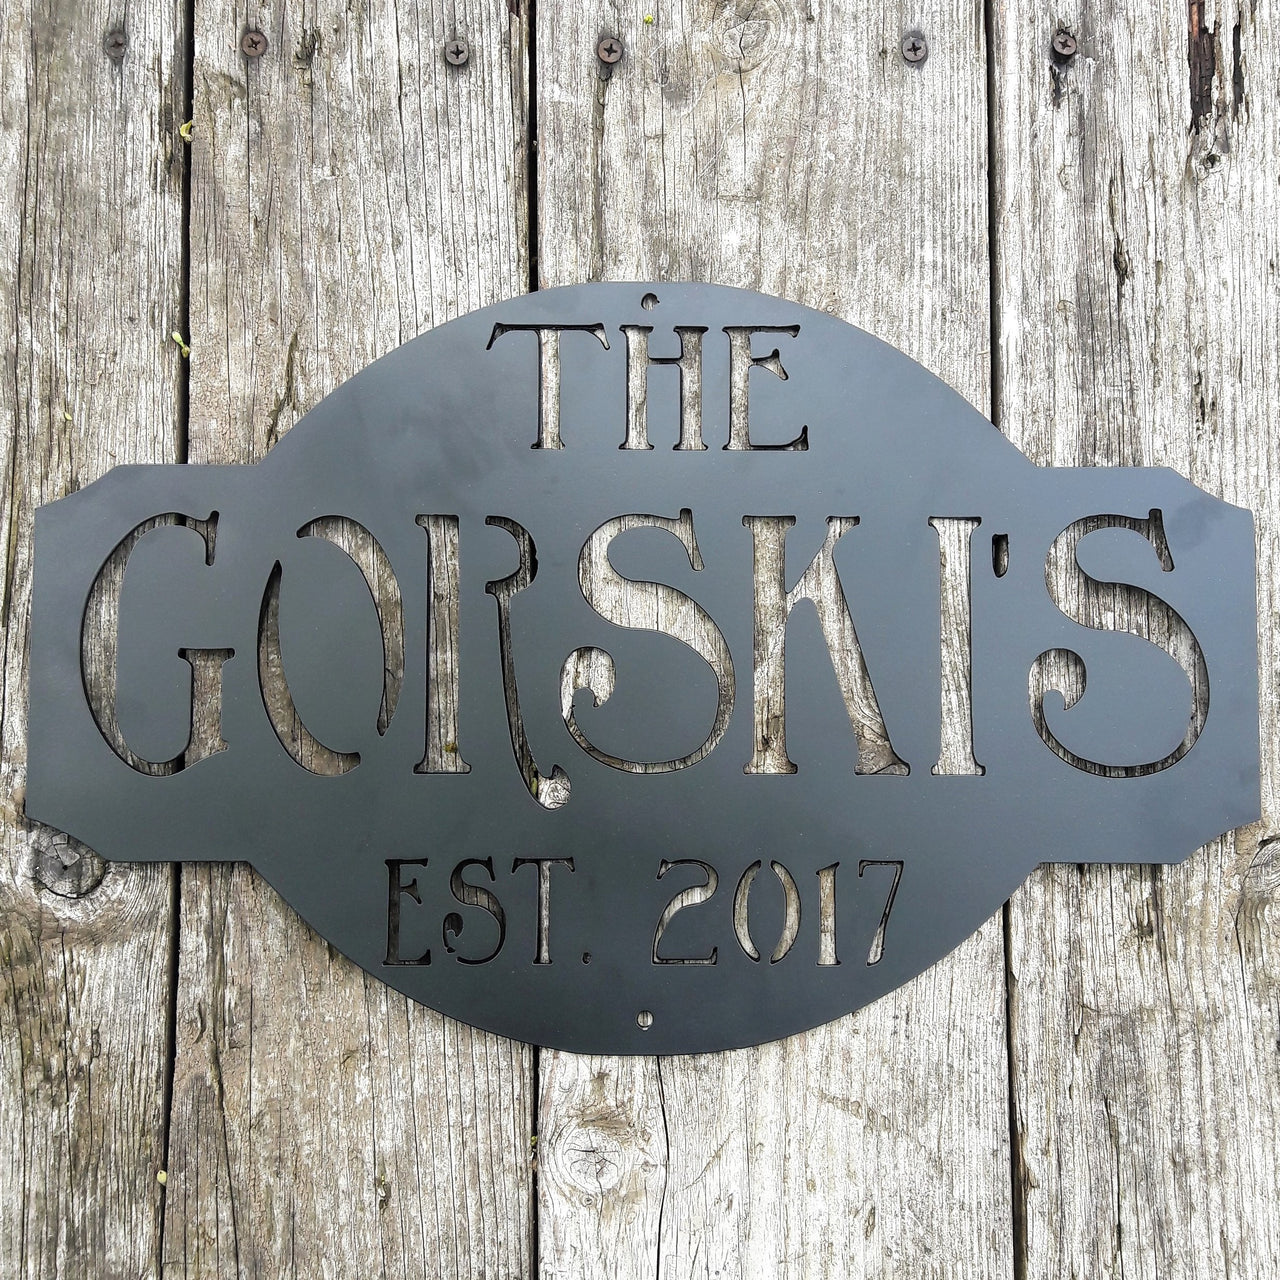 Rustic metal sign black powder coated. The sign reads, " The Gorski's est. 2017"Rustic metal sign outdoor black powder coated. The sign reads, " The Gorski's est. 2017"